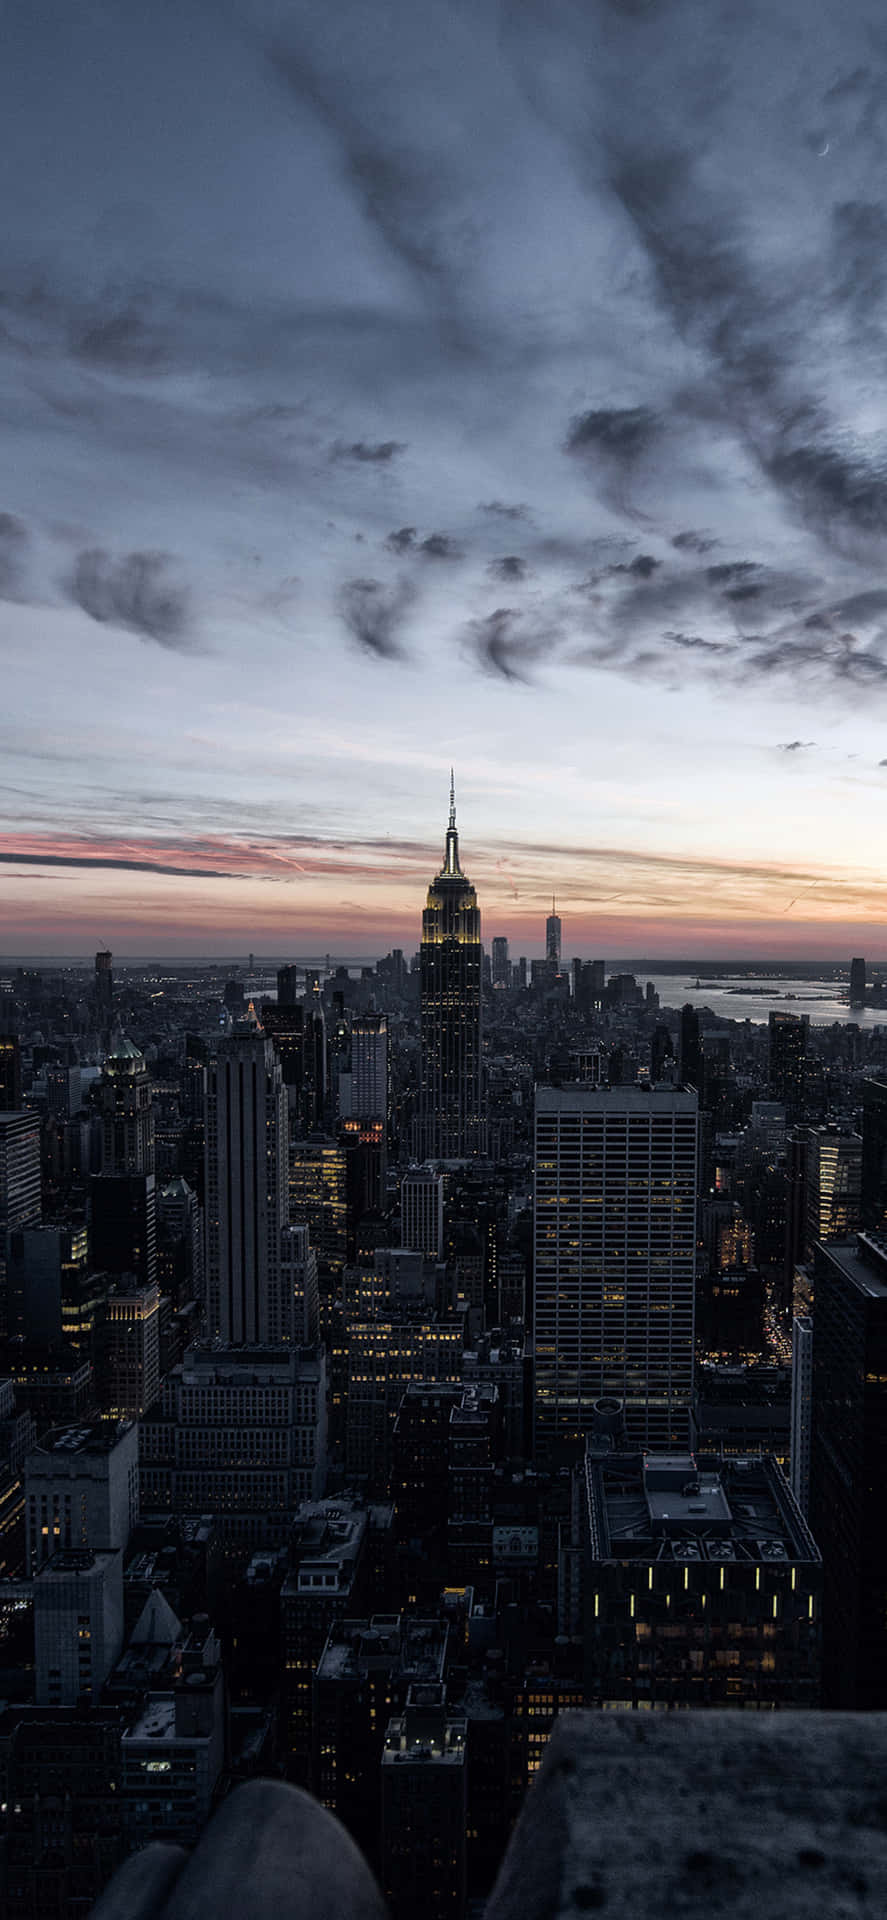 Enjoy stunning skyline views of New York with the new iPhone Xs.